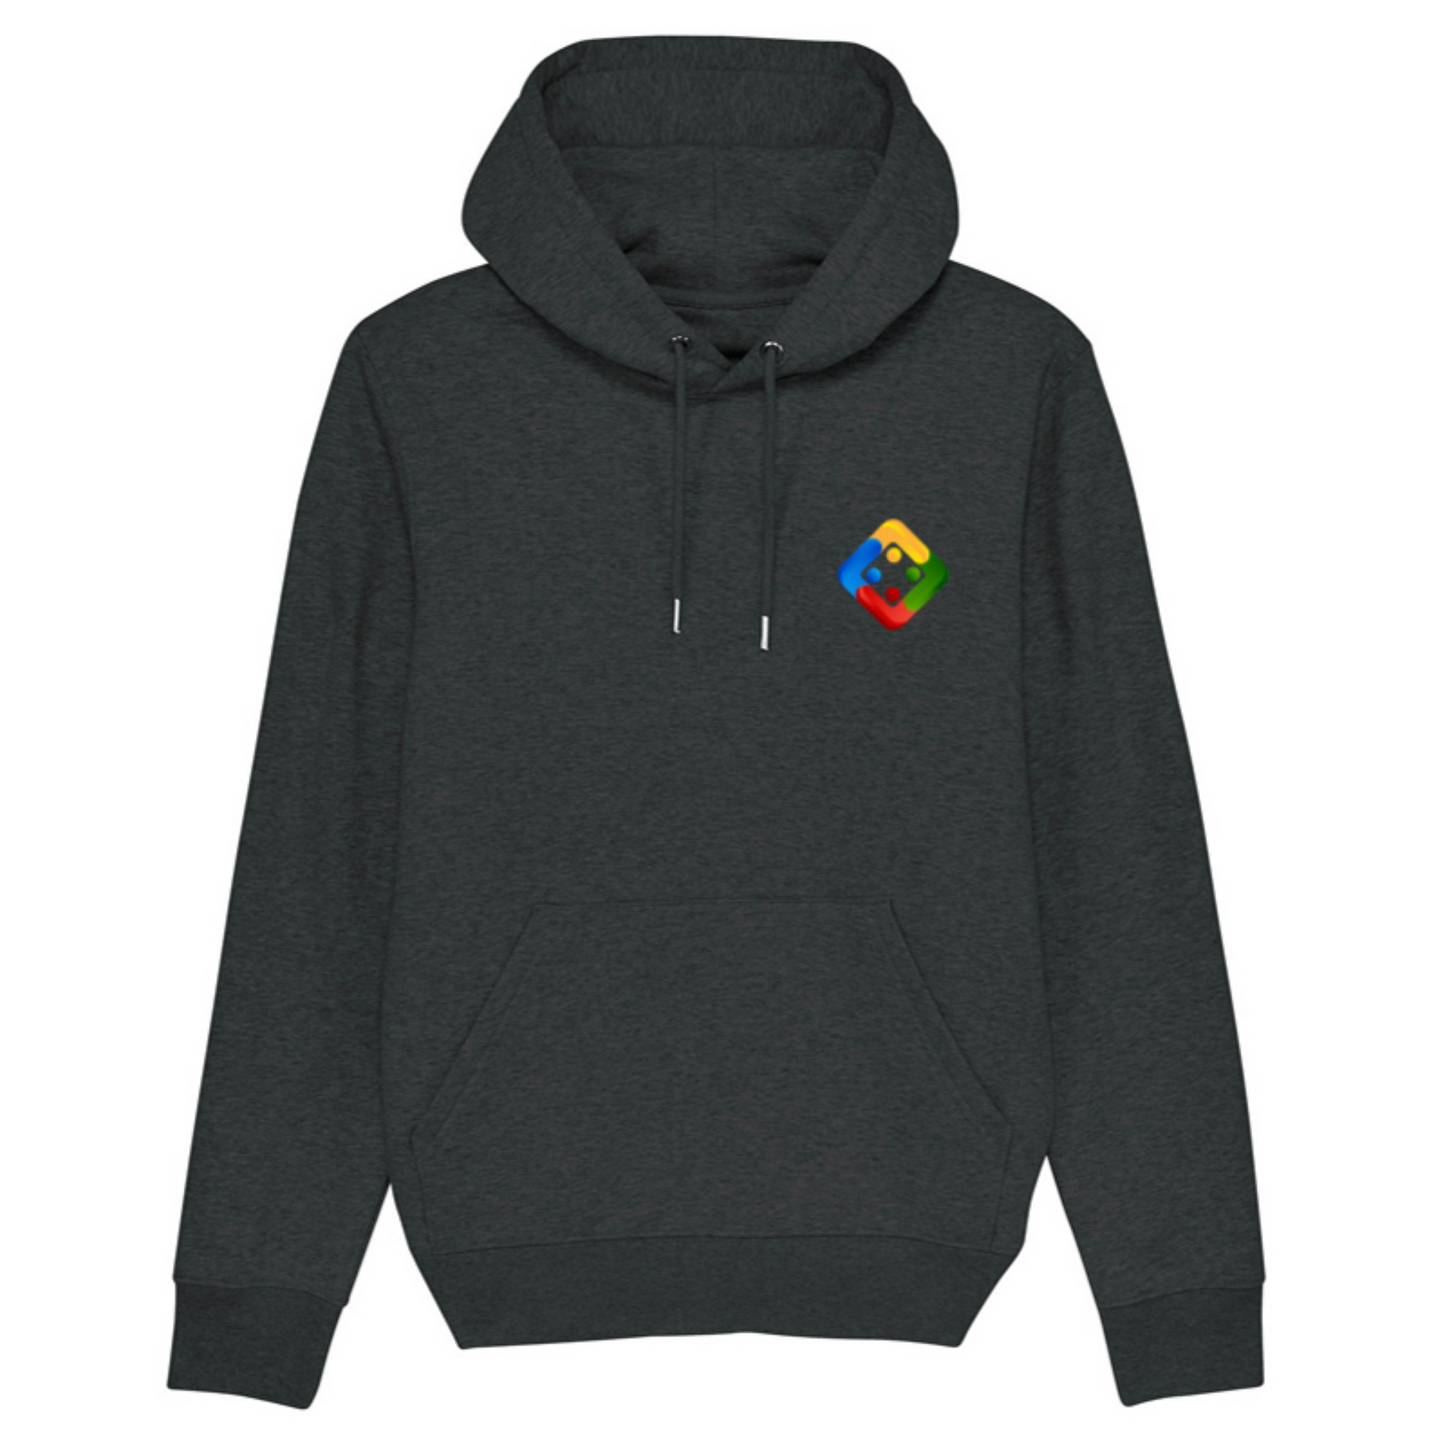 Unisex organic heavyweight hoodie with embroidered Uckers emblem. Available in 7 colours.